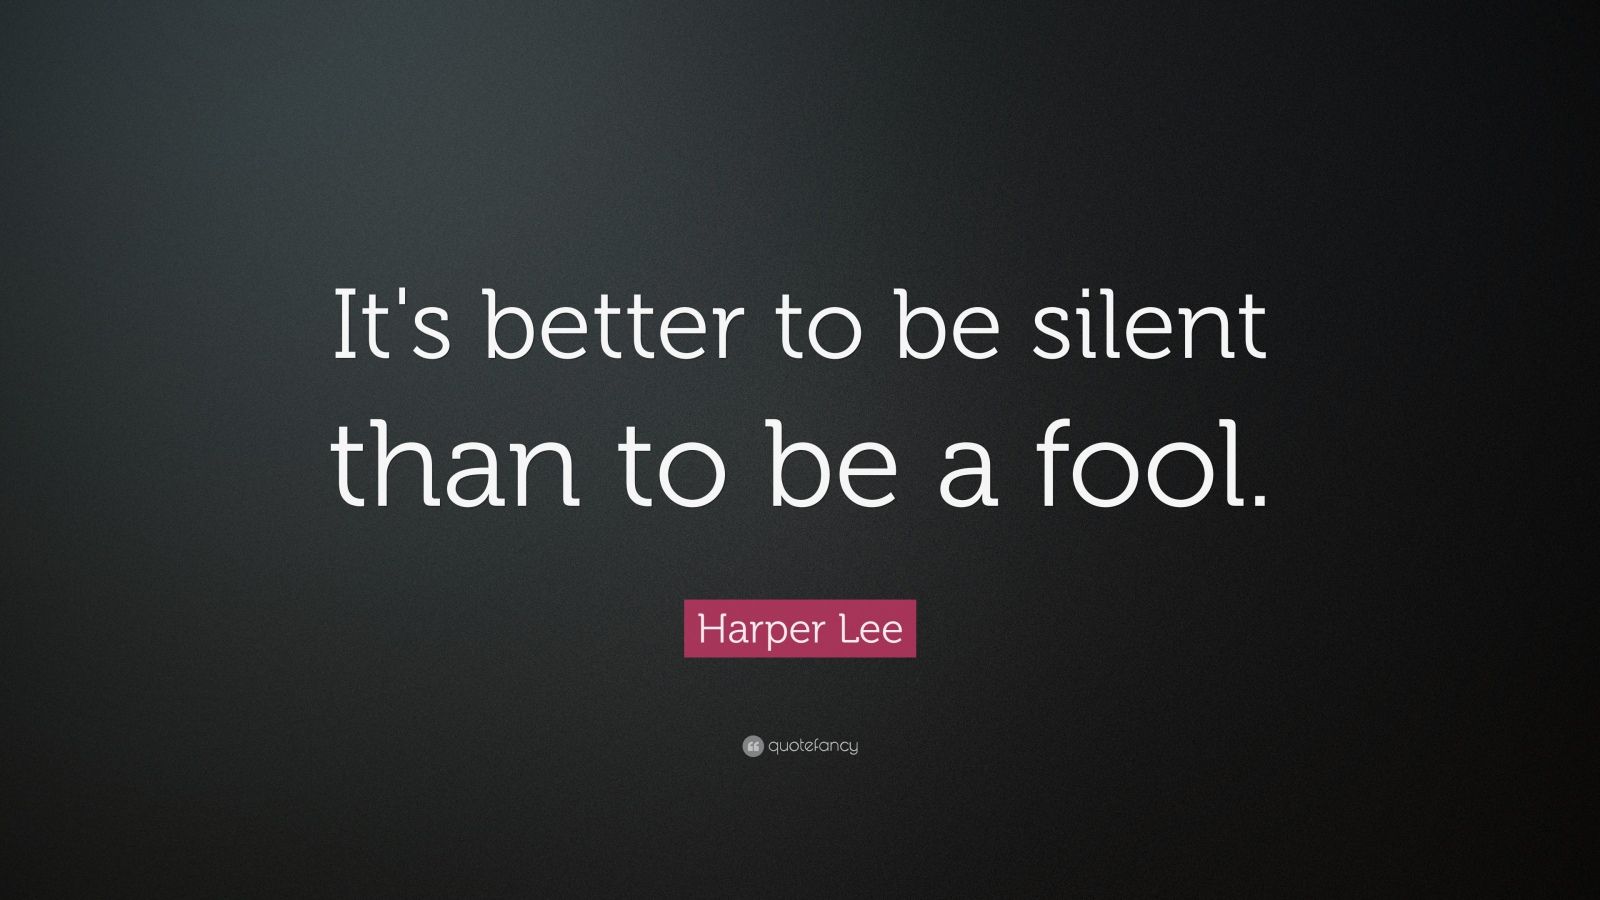 Harper Lee Quote: "It's better to be silent than to be a ...